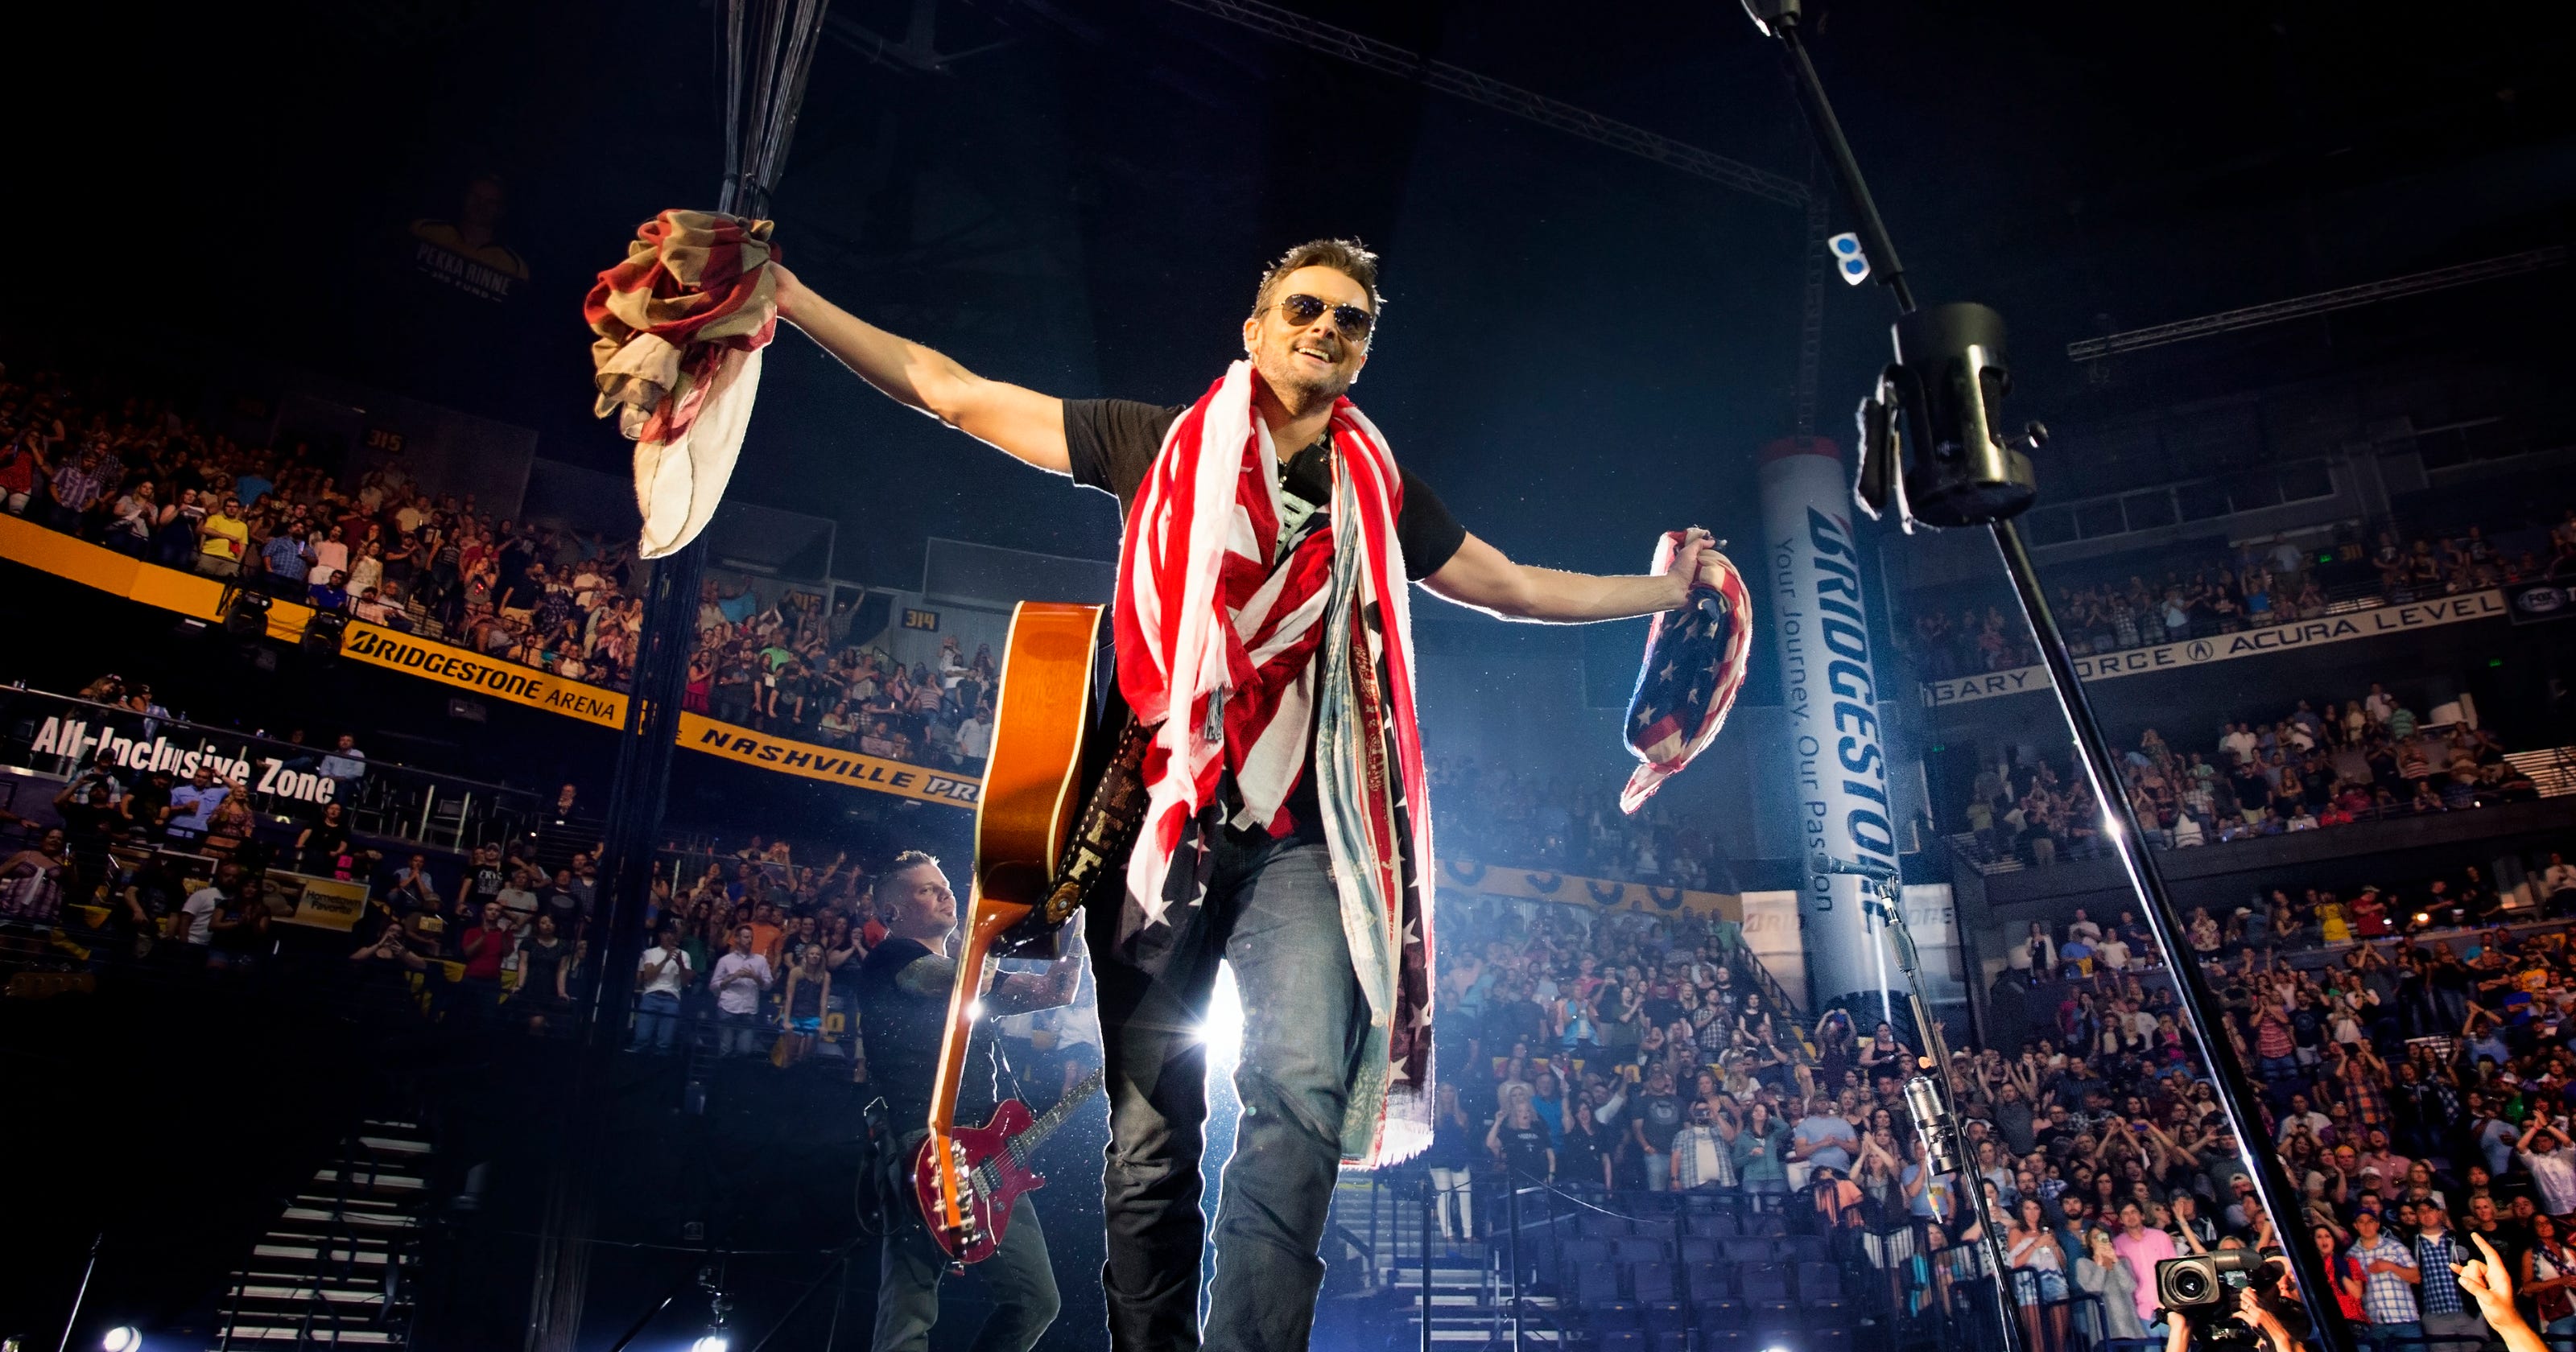 Eric Church ends tour with recordbreaking Nashville concert